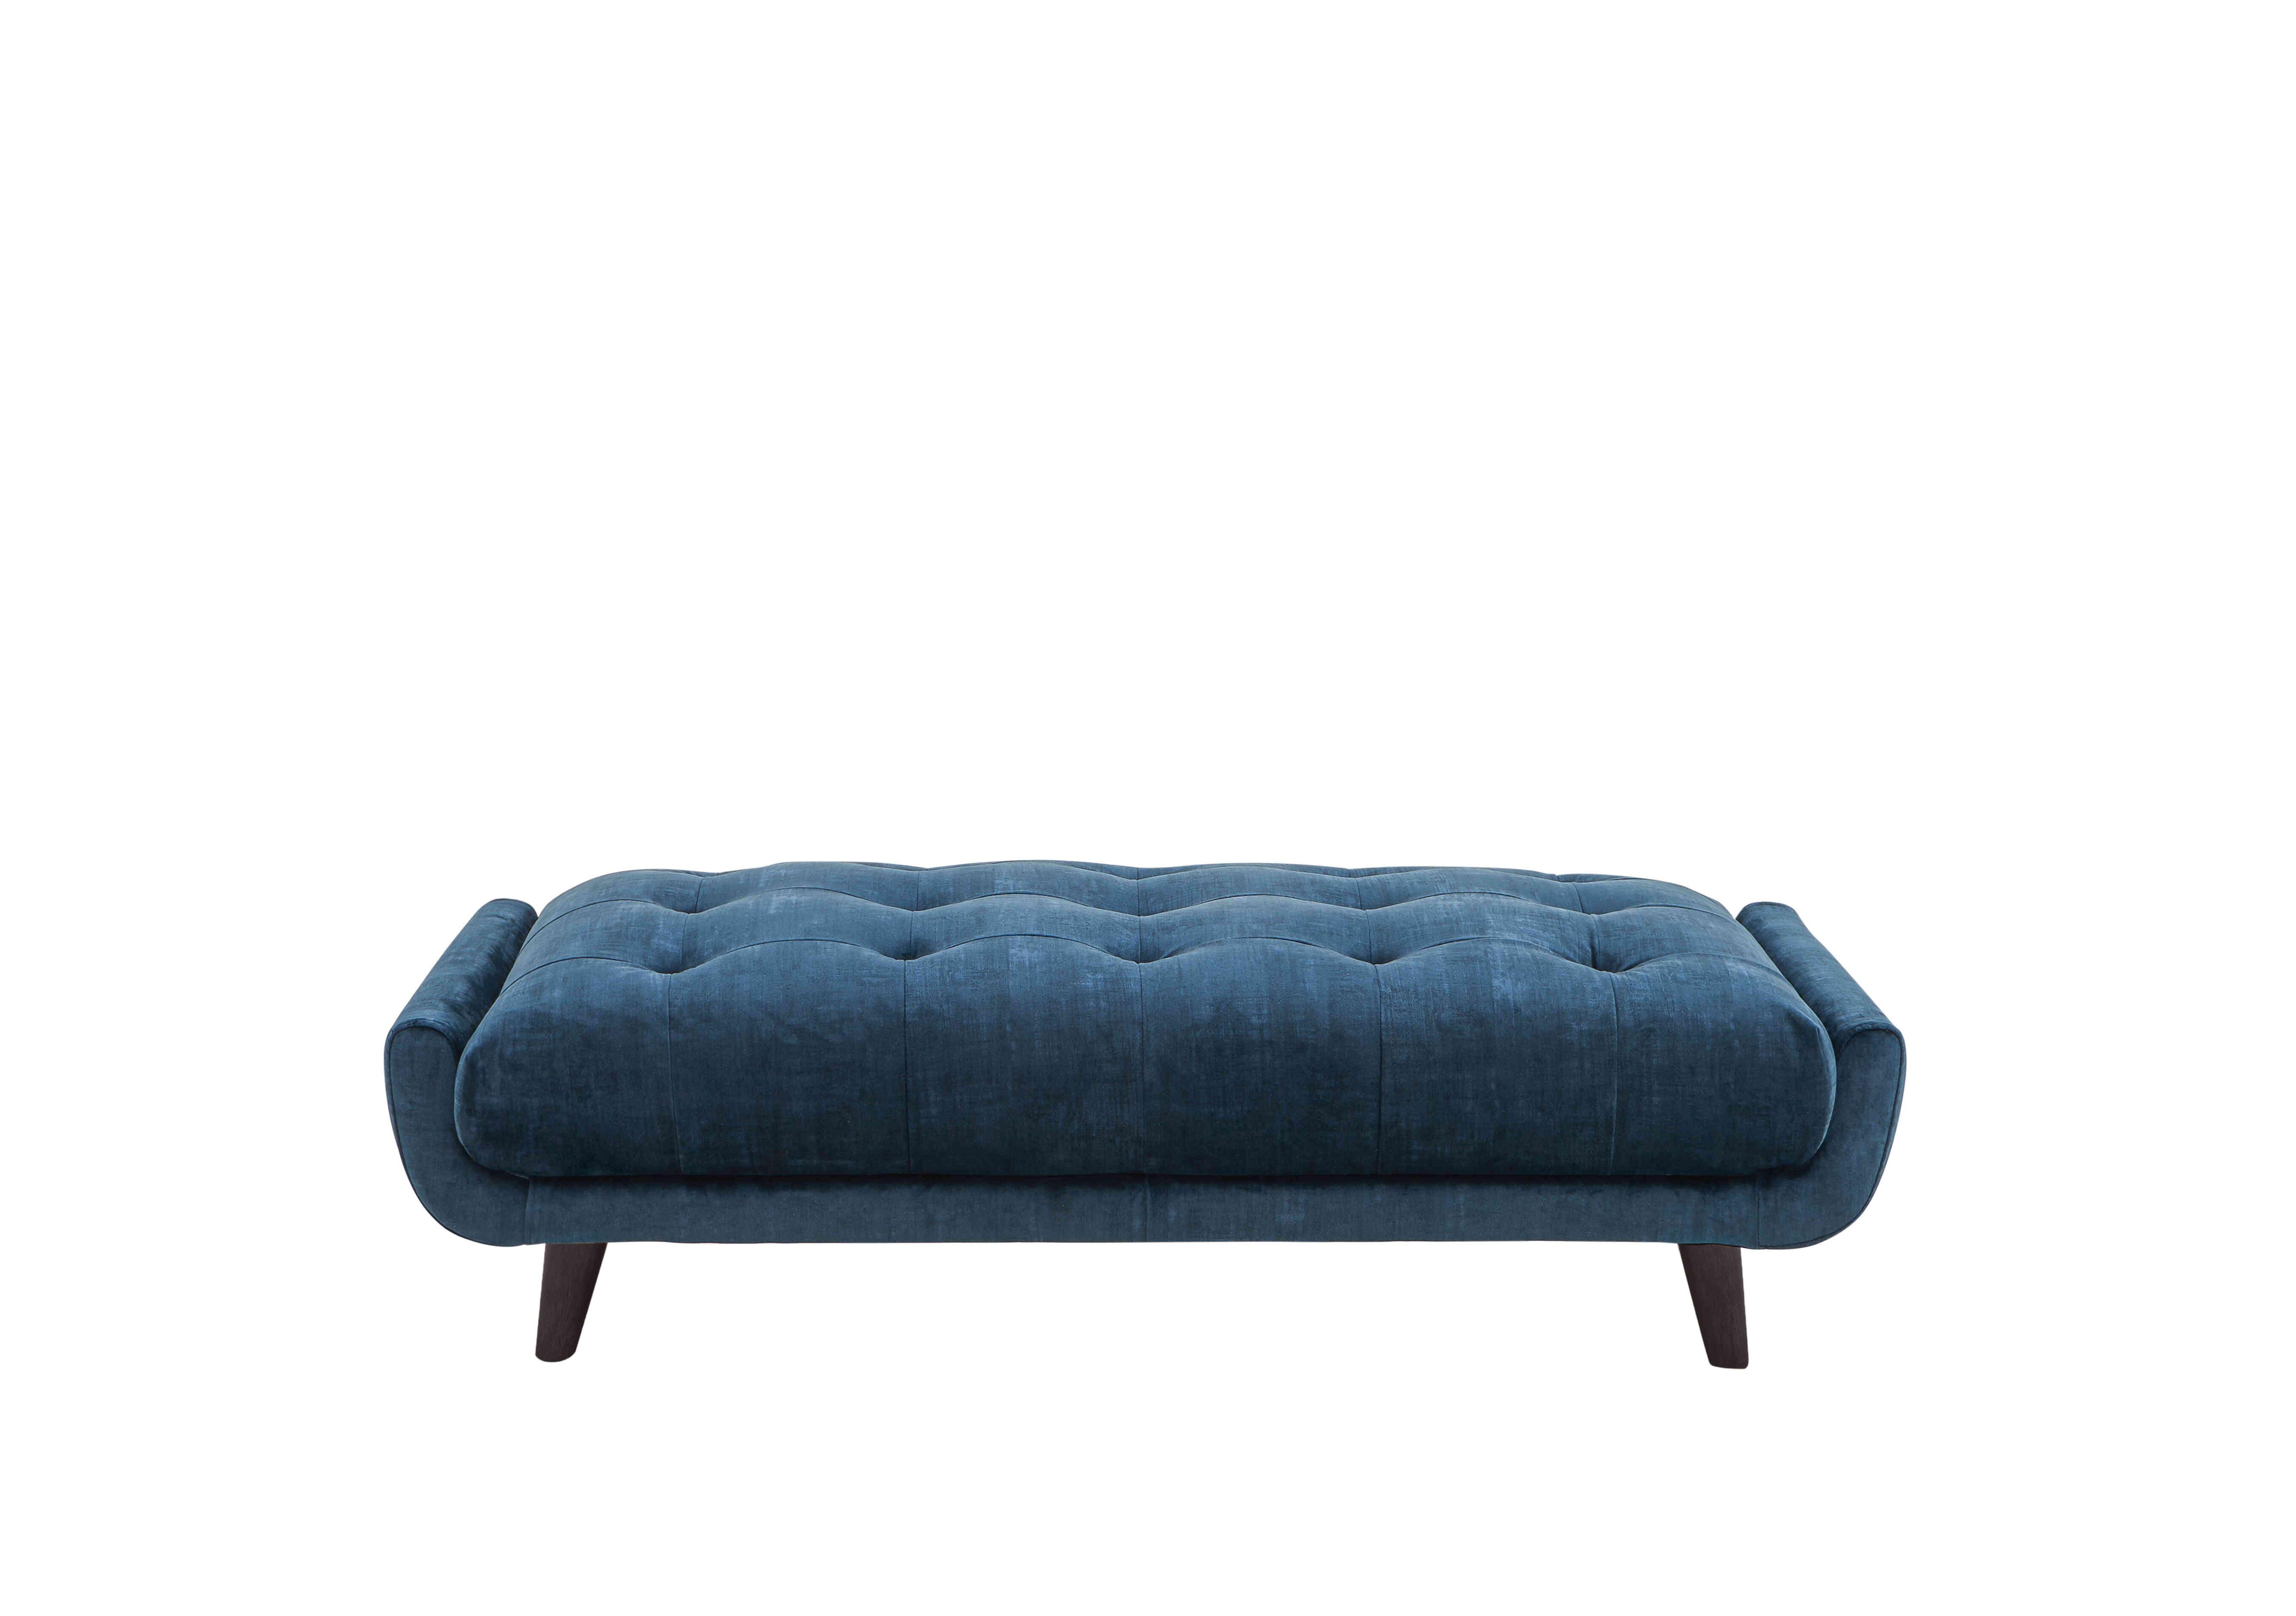 Rene Large Fabric Footstool in Heritage 52000 Airforce Es Ft on Furniture Village